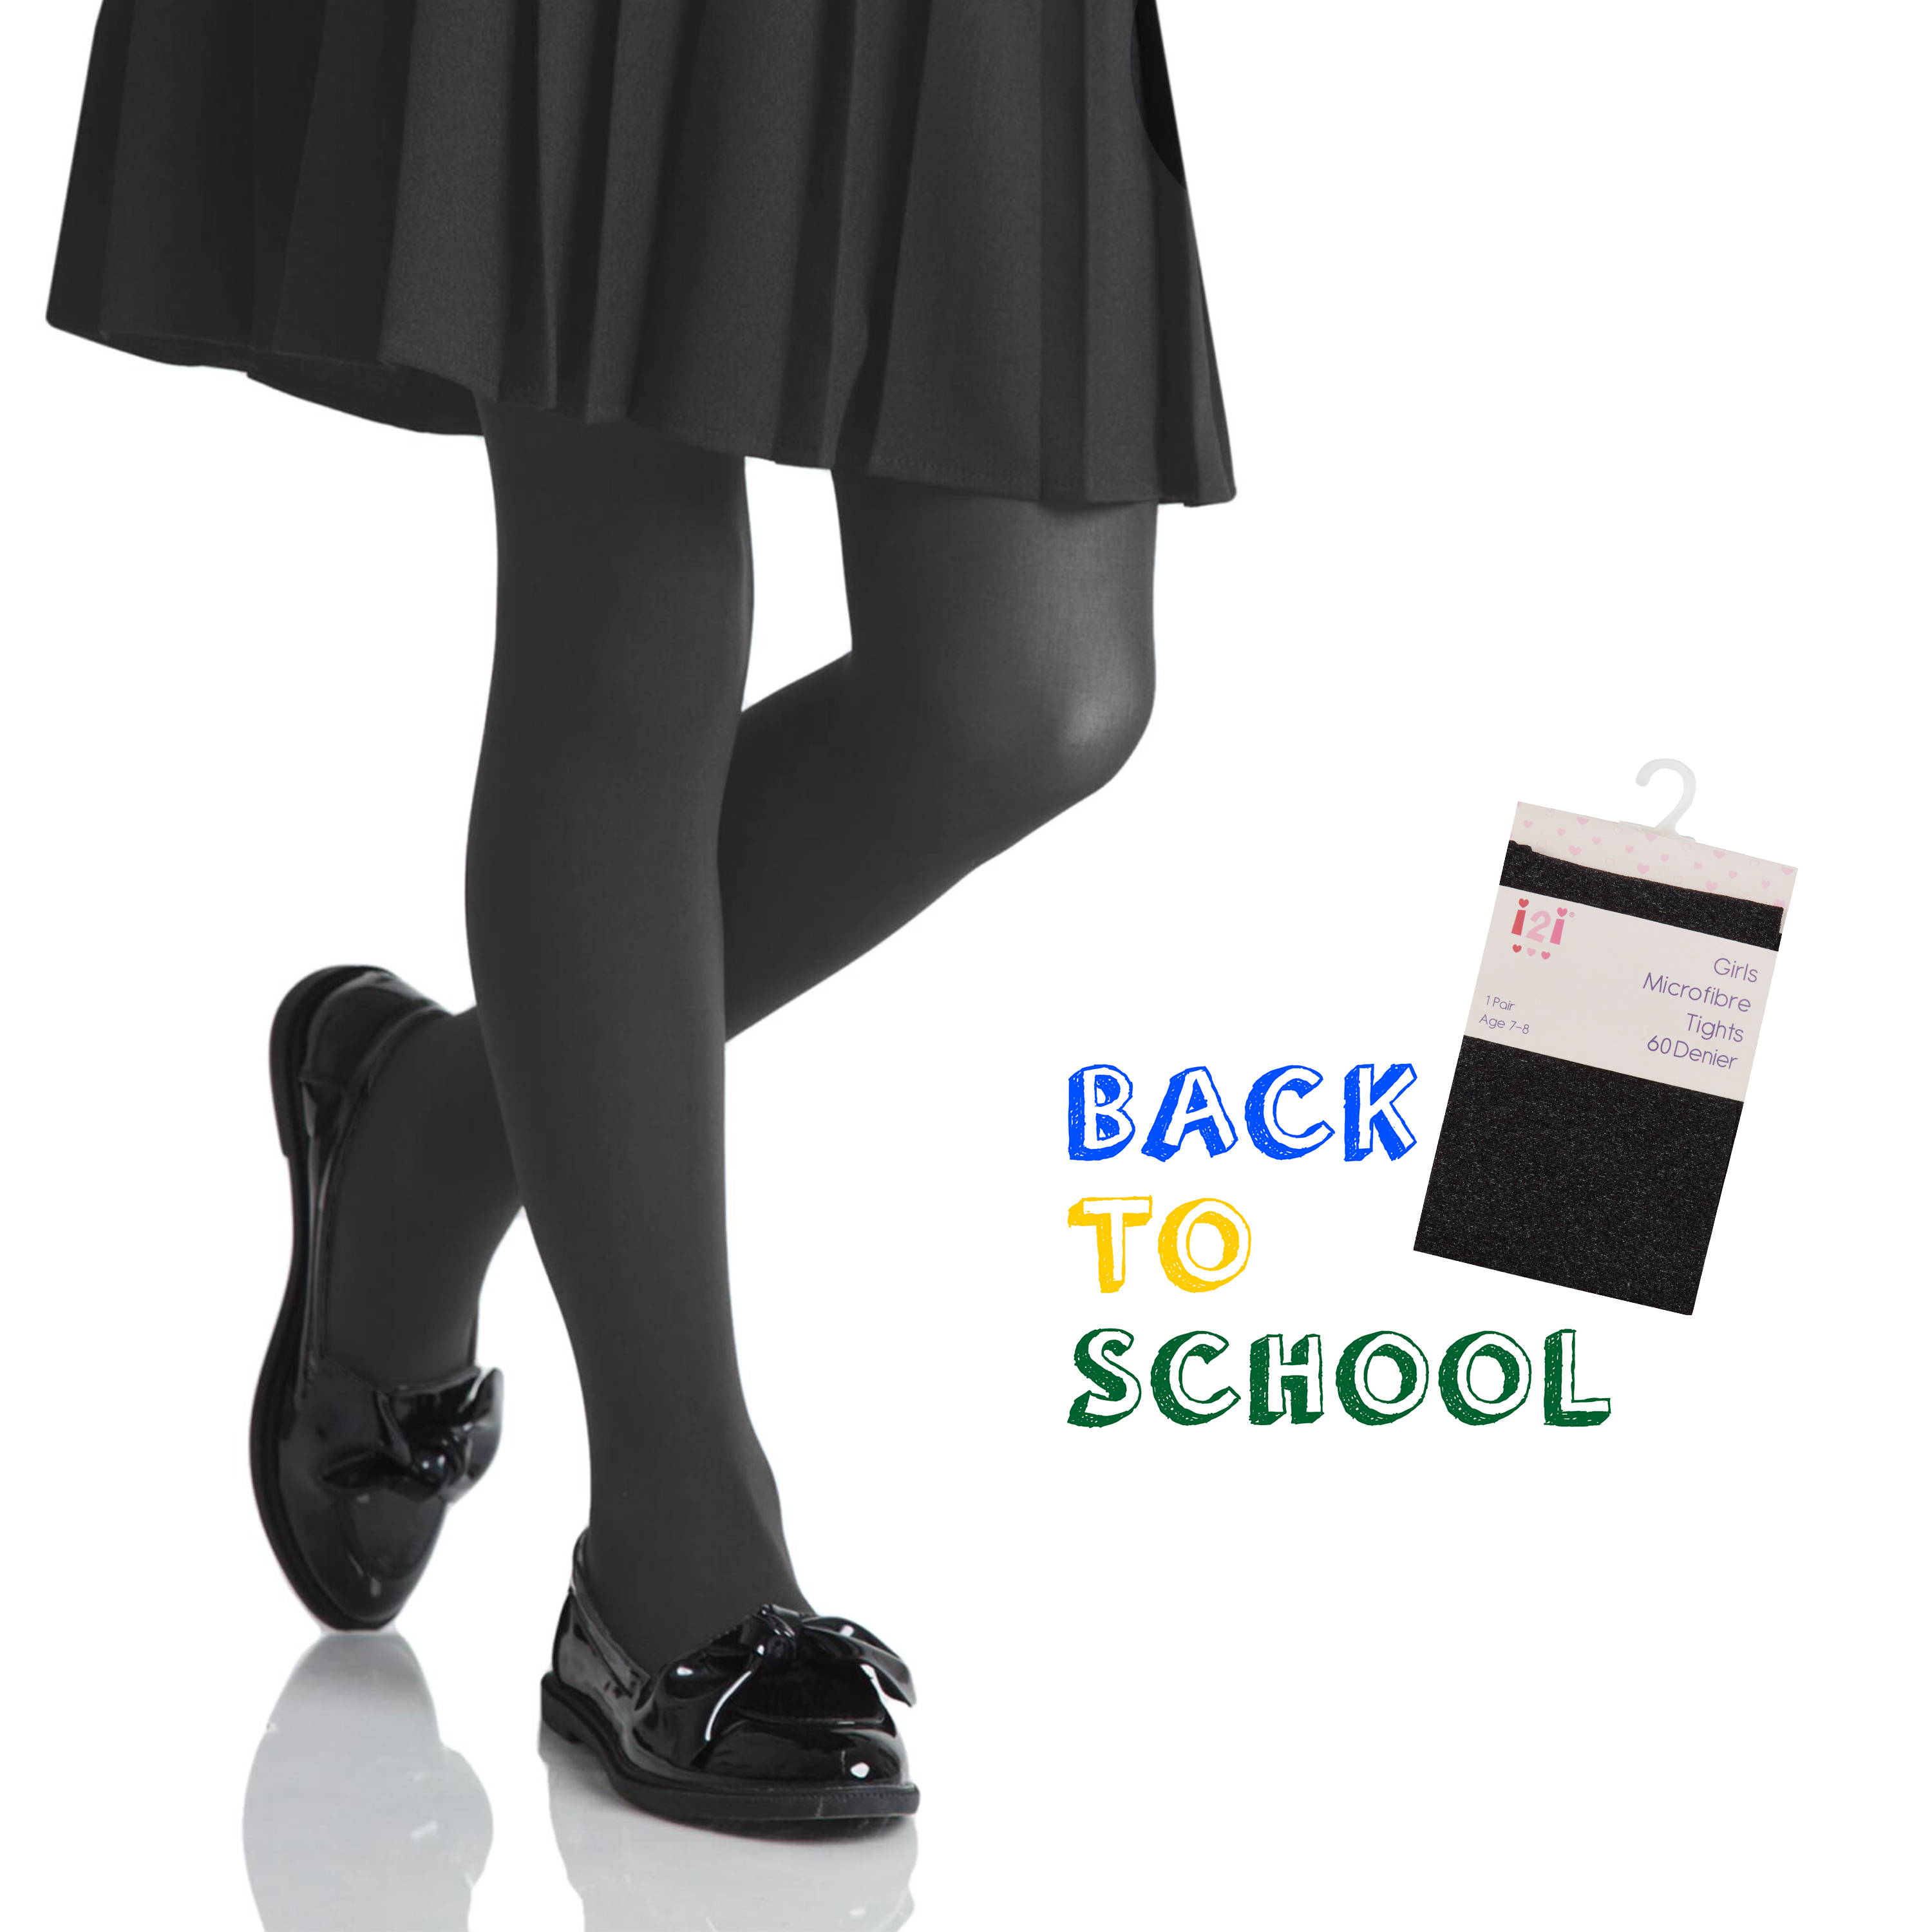 New M&S Girls School 2 Pairs Opaque Tights 60 Denier Black Age 9-10 Years £7.50 